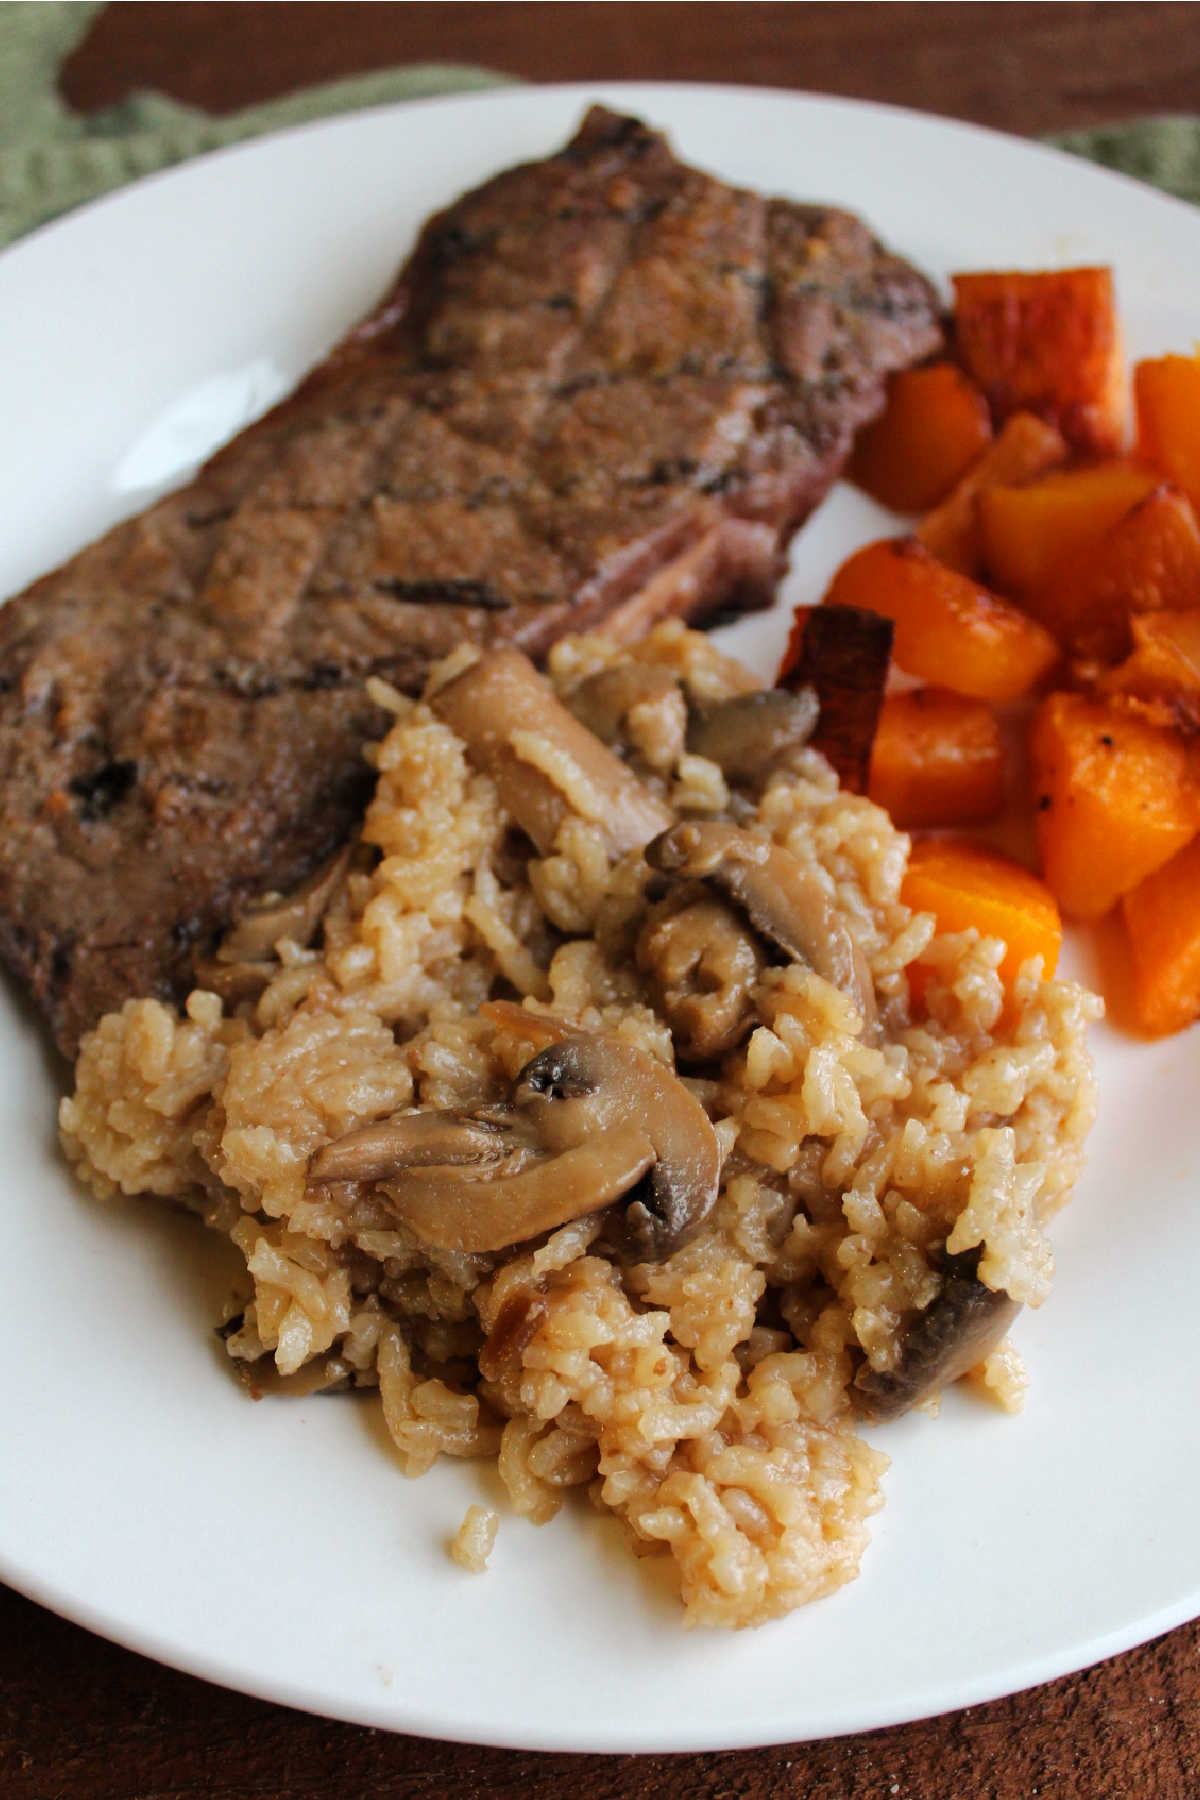 Mushroom baked rice served on dinner plate with steak and roasted butternut squash.